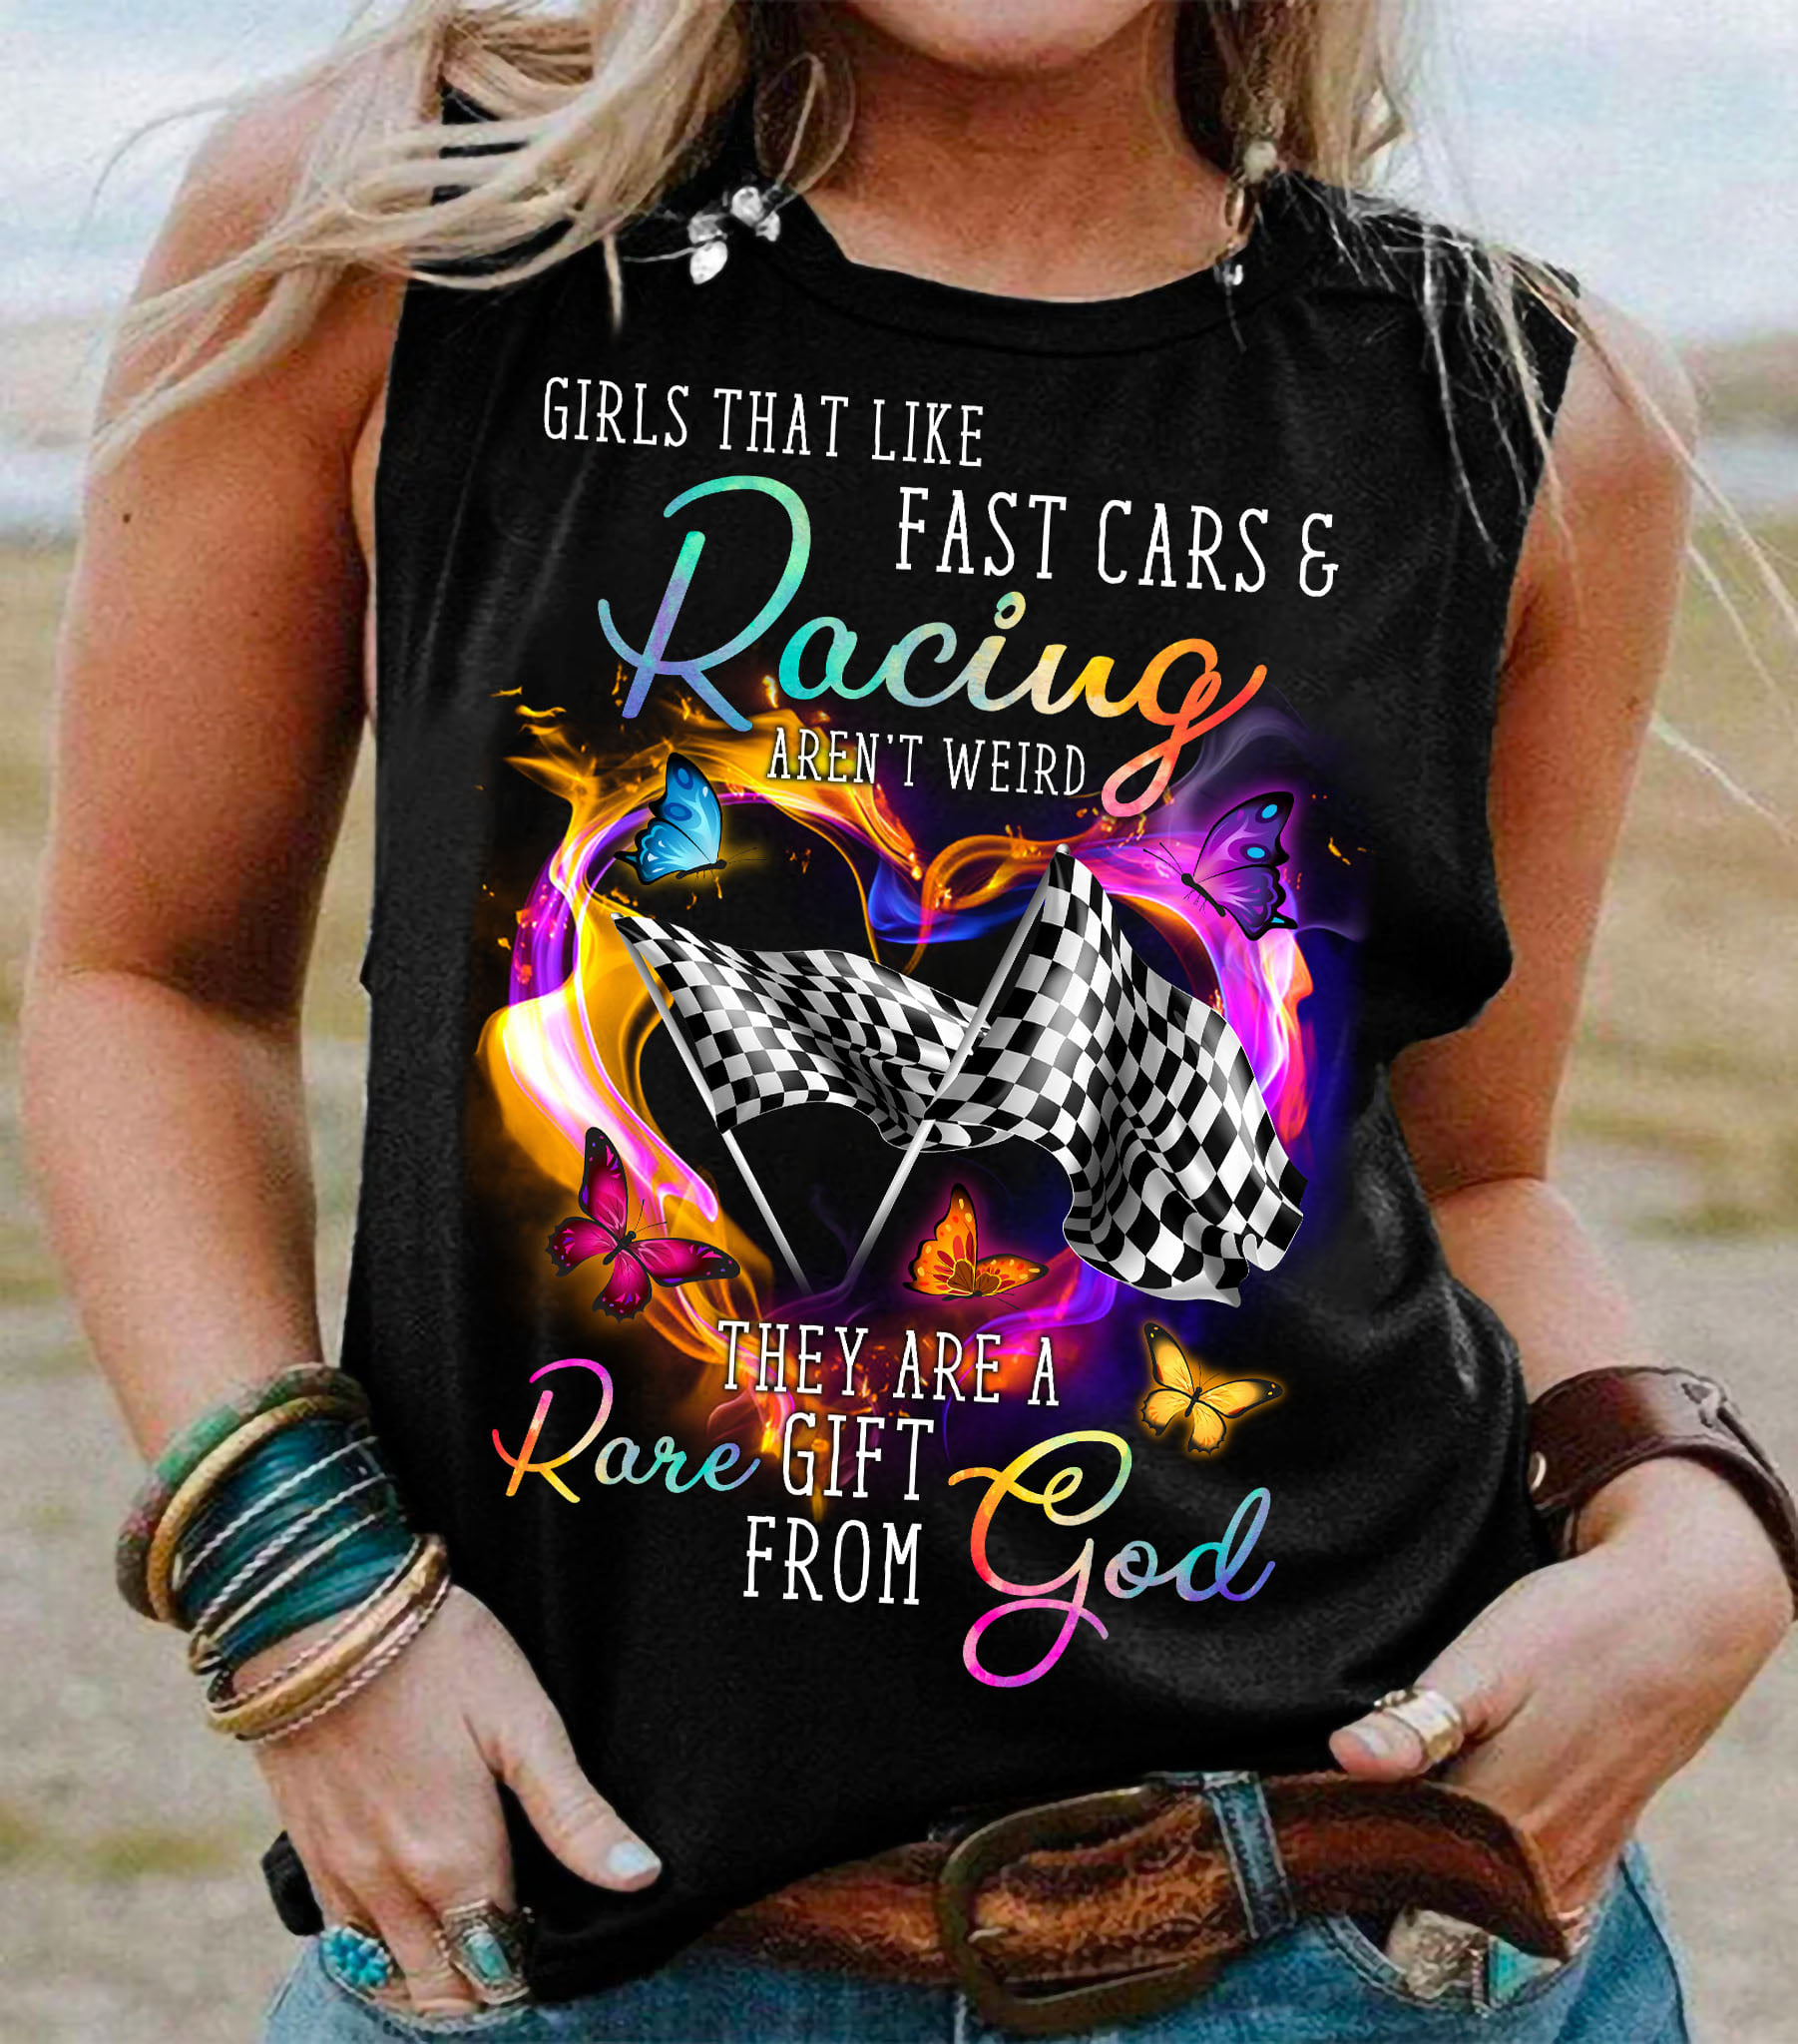 Racing Flag - Girls that like fast cars and racing aren't weird they are a rare gift form god